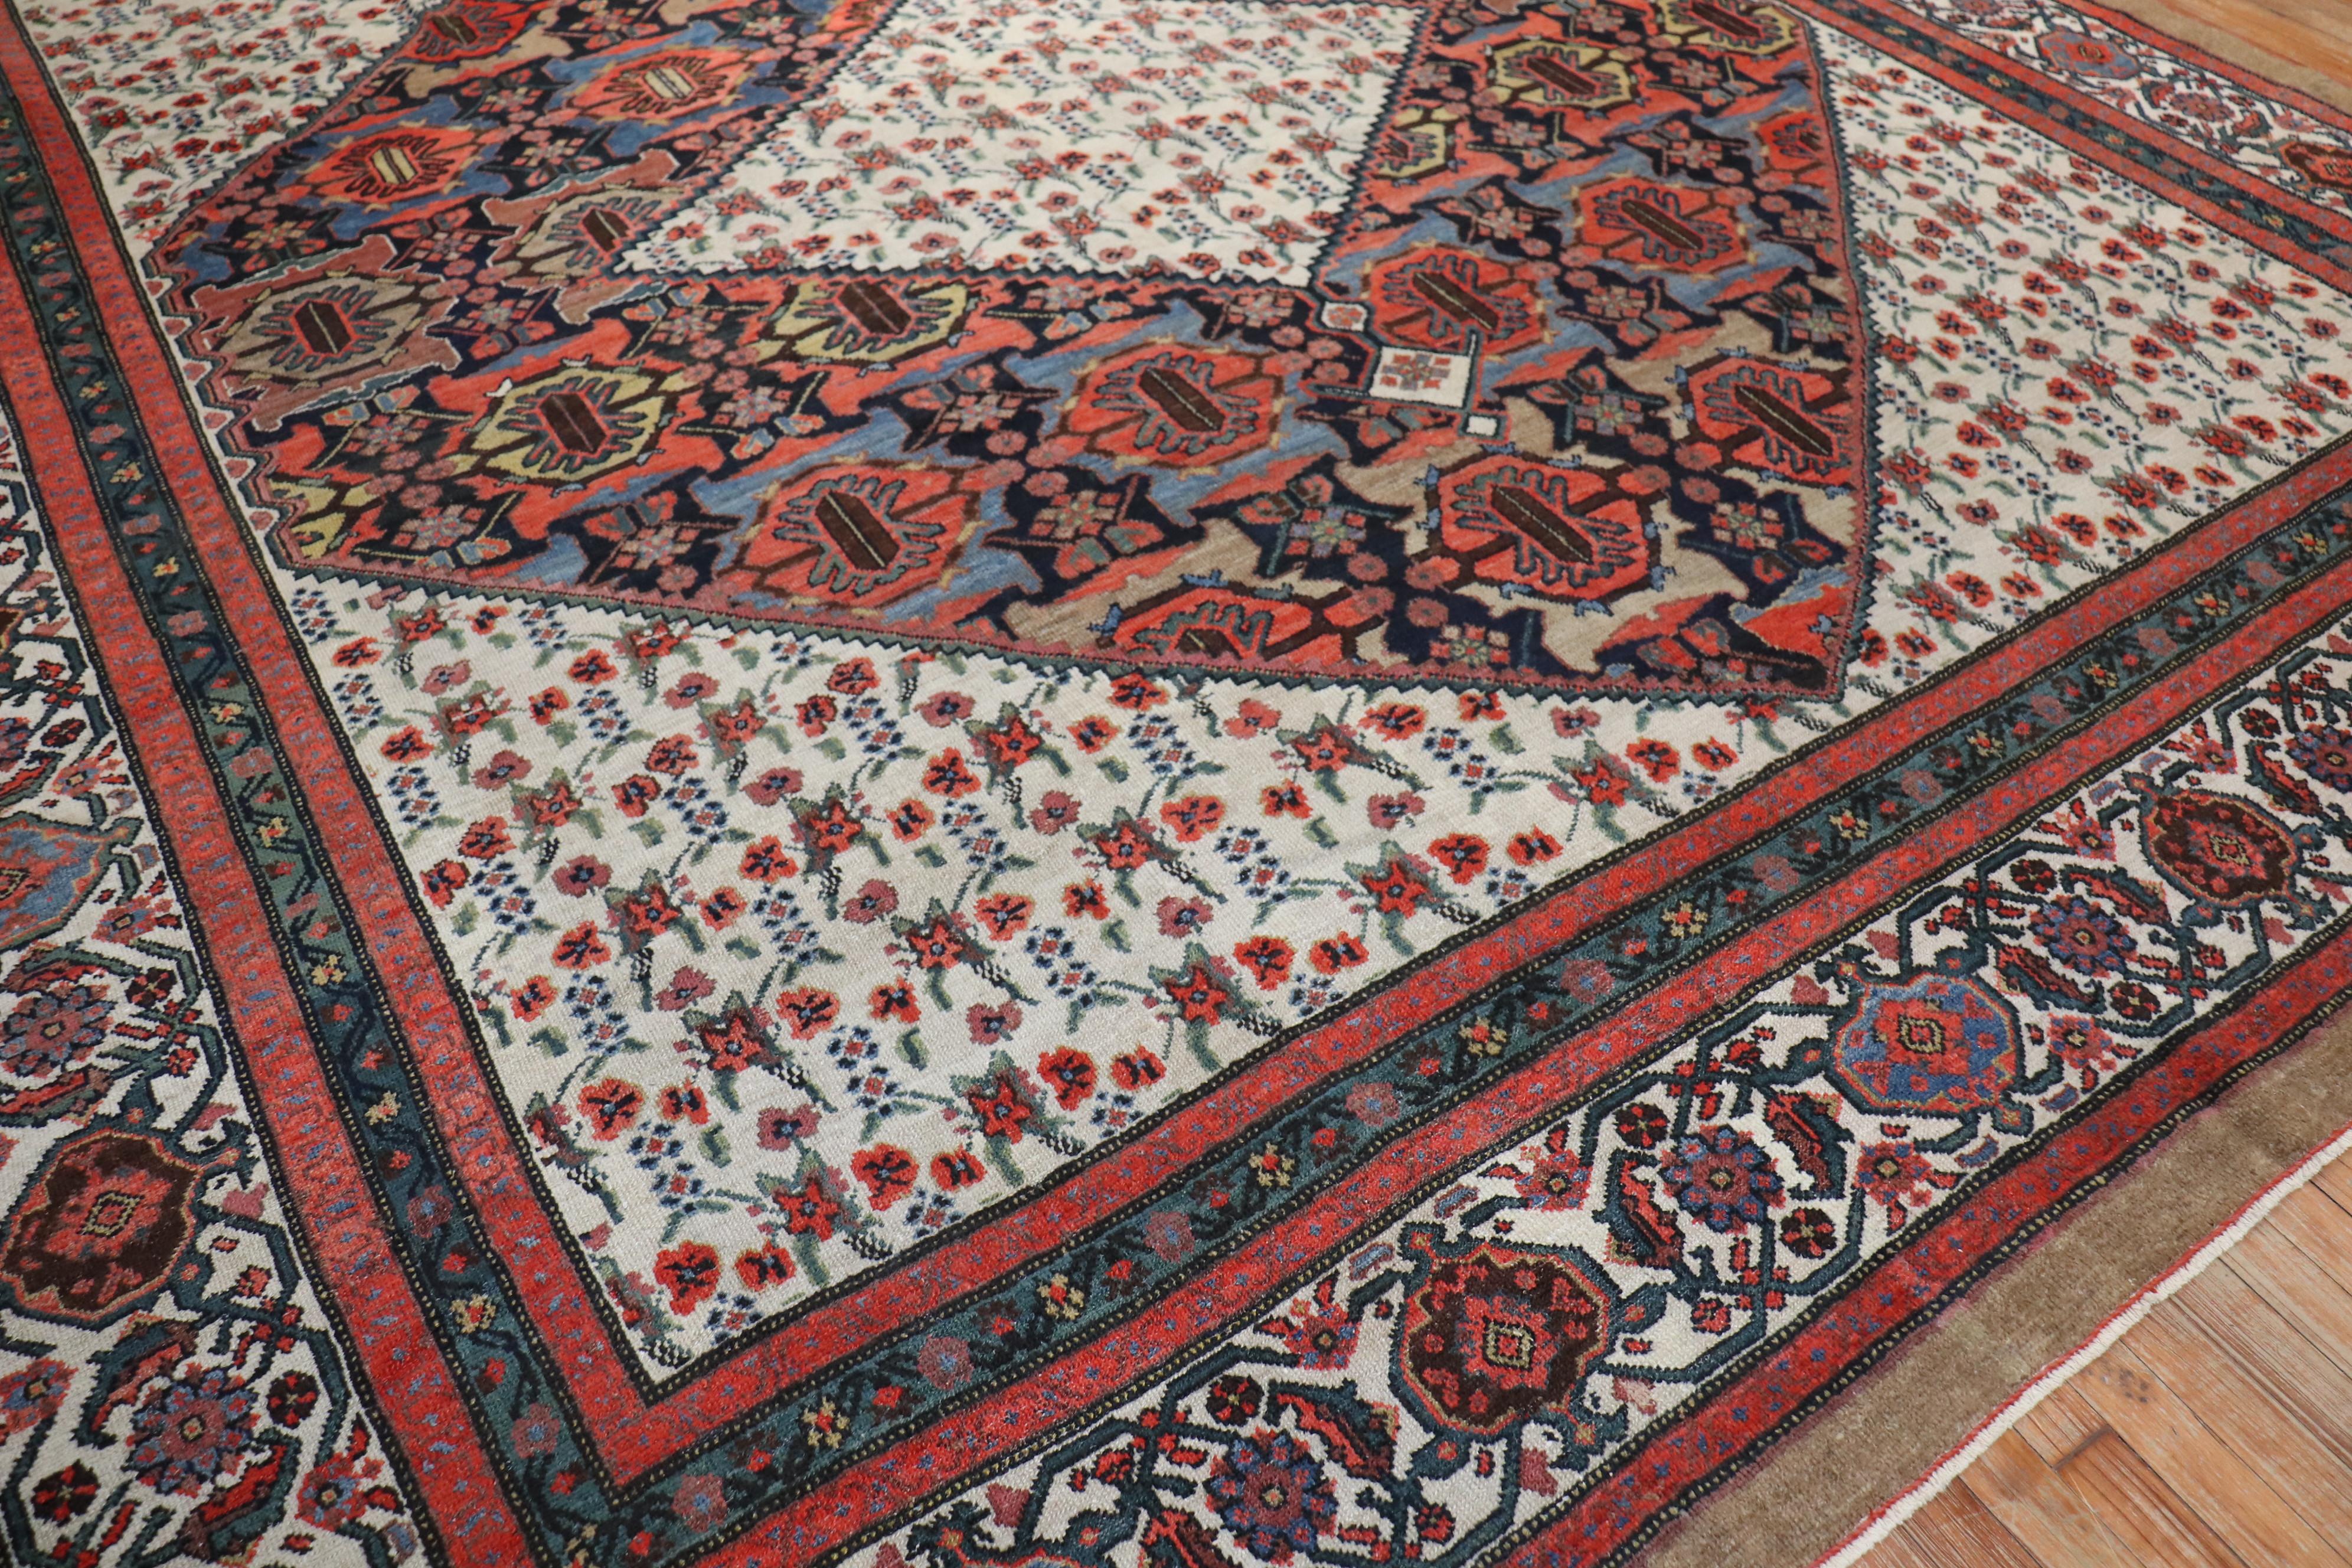 A dramatic traditional Persian Serab Hamedan village rug from the second quarter of the 20th century.

Measures: 10'9